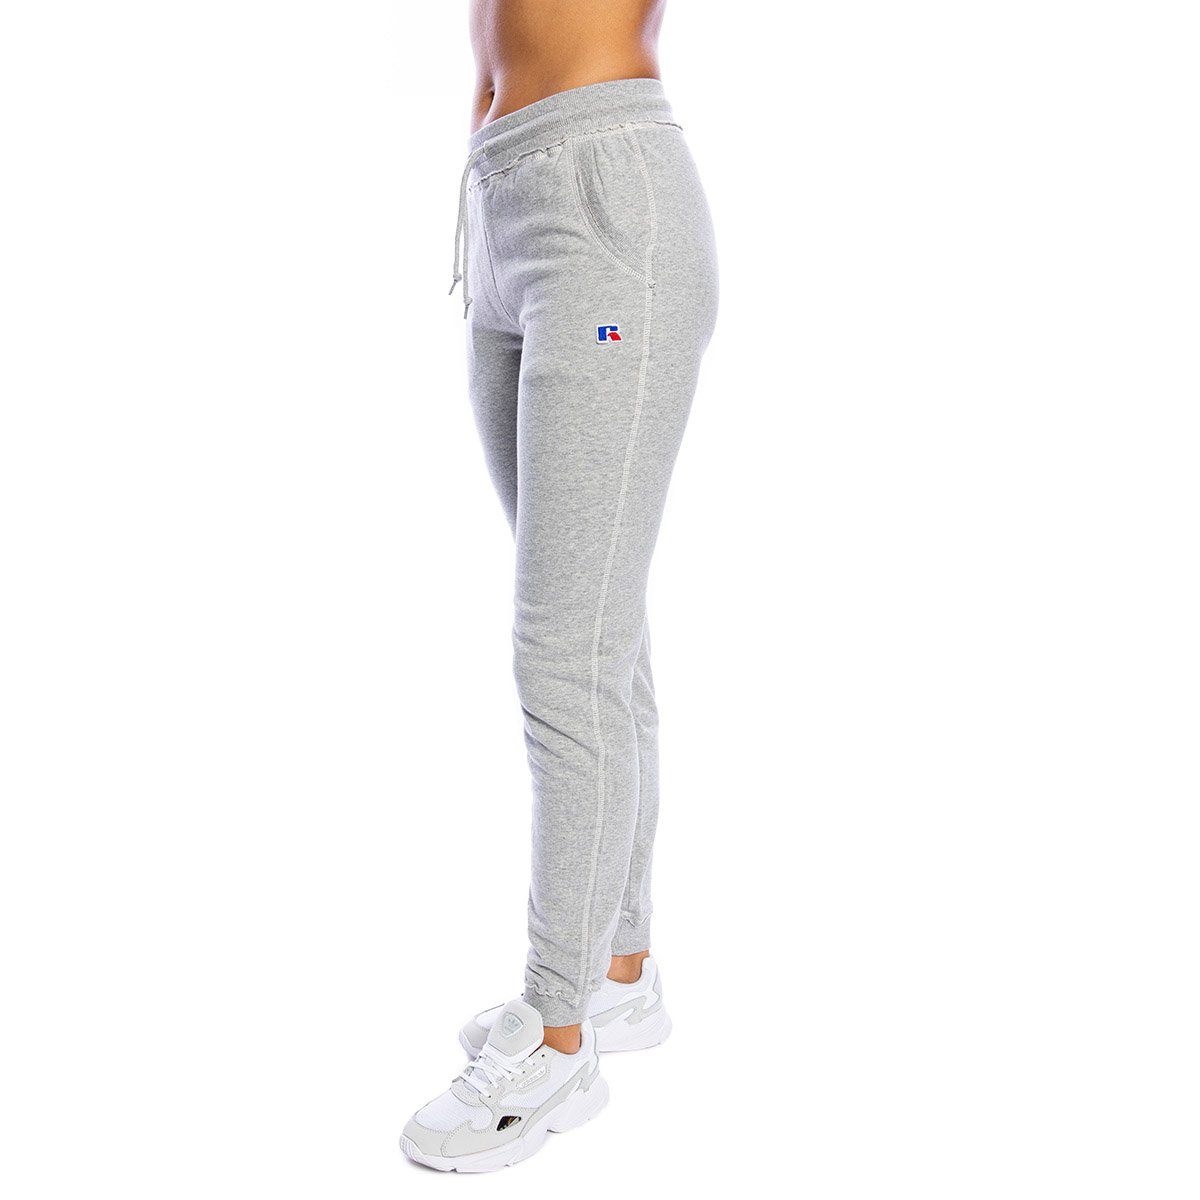 Russell Athletic joggers in grey